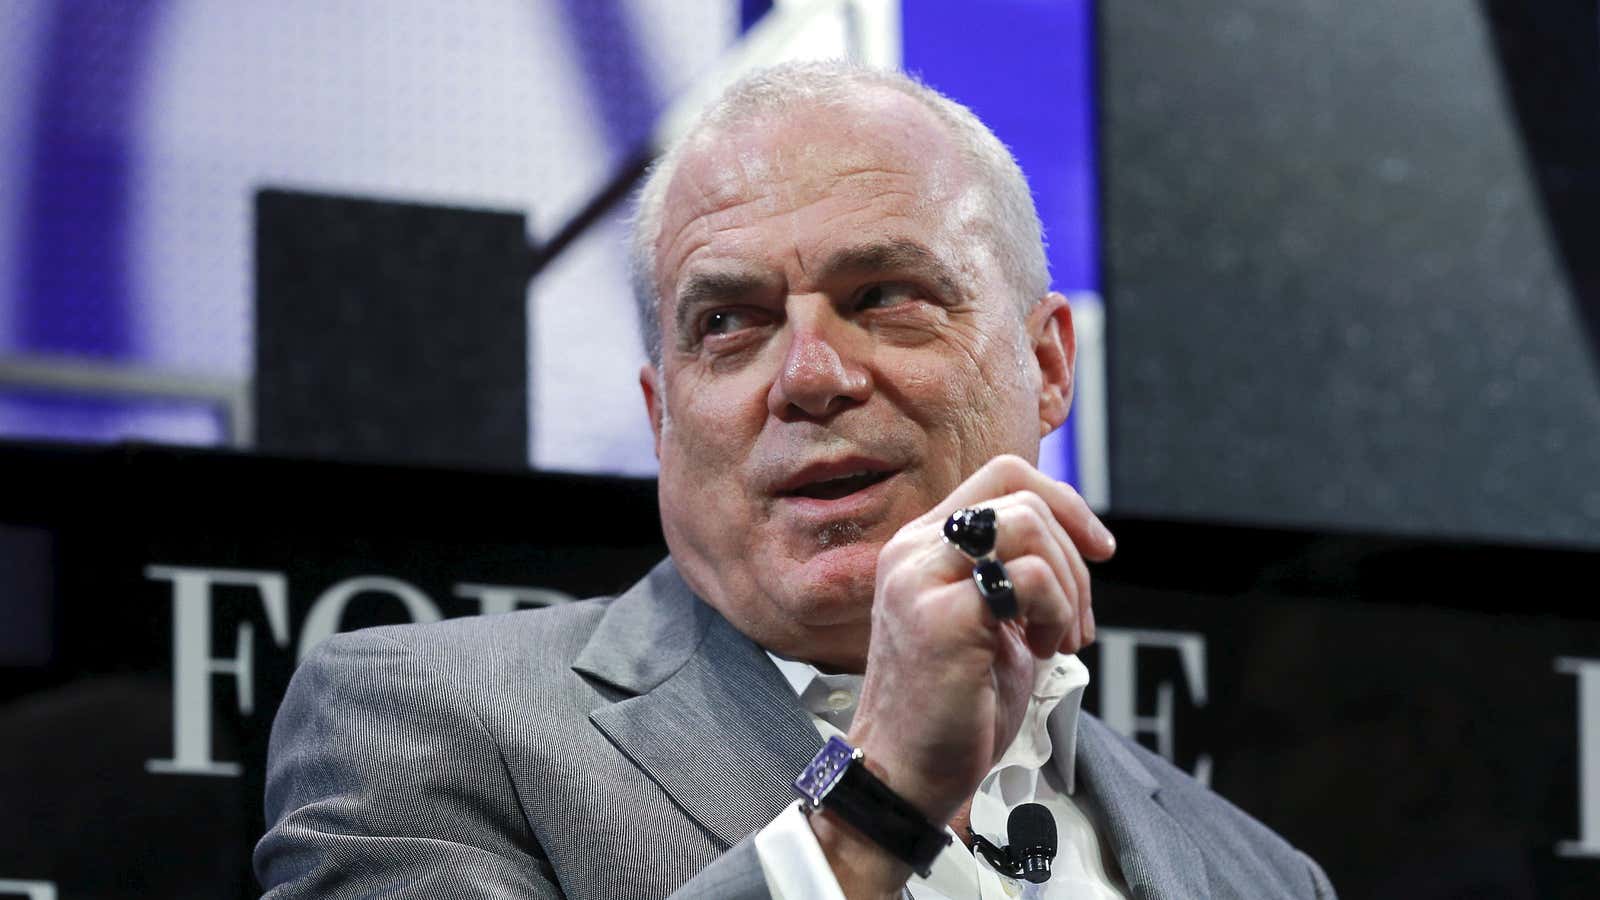 Aetna CEO Mark Bertolini would “welcome the opportunity to provide any further clarification you may need.”